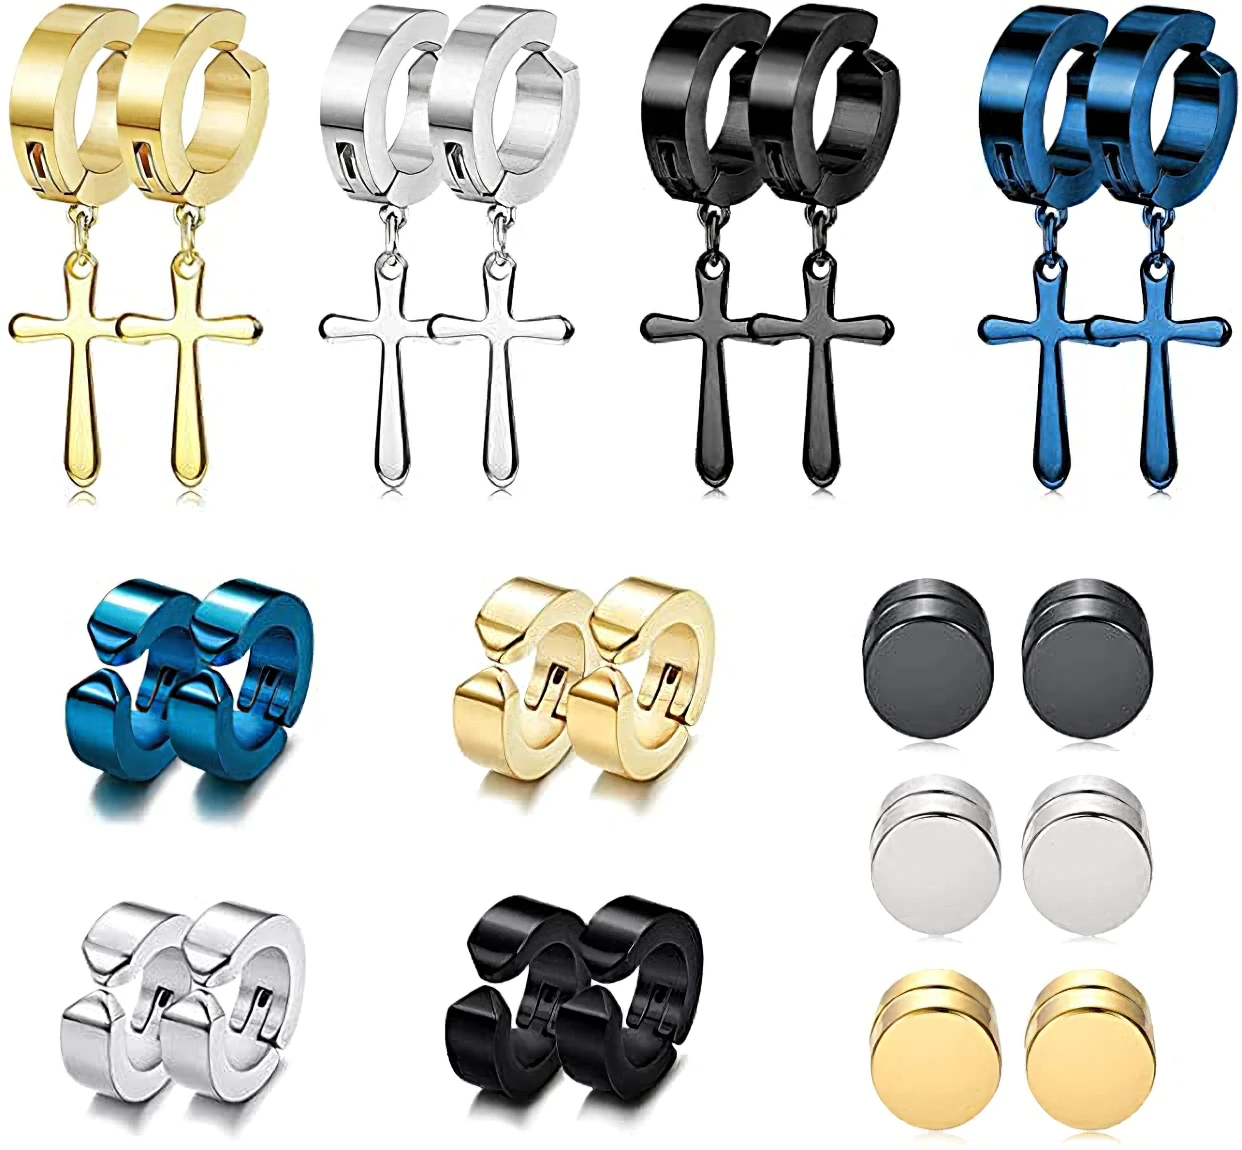 NEWITIN 9 Pairs Magnetic Stud Earrings Stainless Steel Cross Earrings Non  Piercing Cross Dangle Hoop Earrings Magnet Cross Earrings Set for Men and  Women 3.0 : Amazon.ca: Clothing, Shoes & Accessories